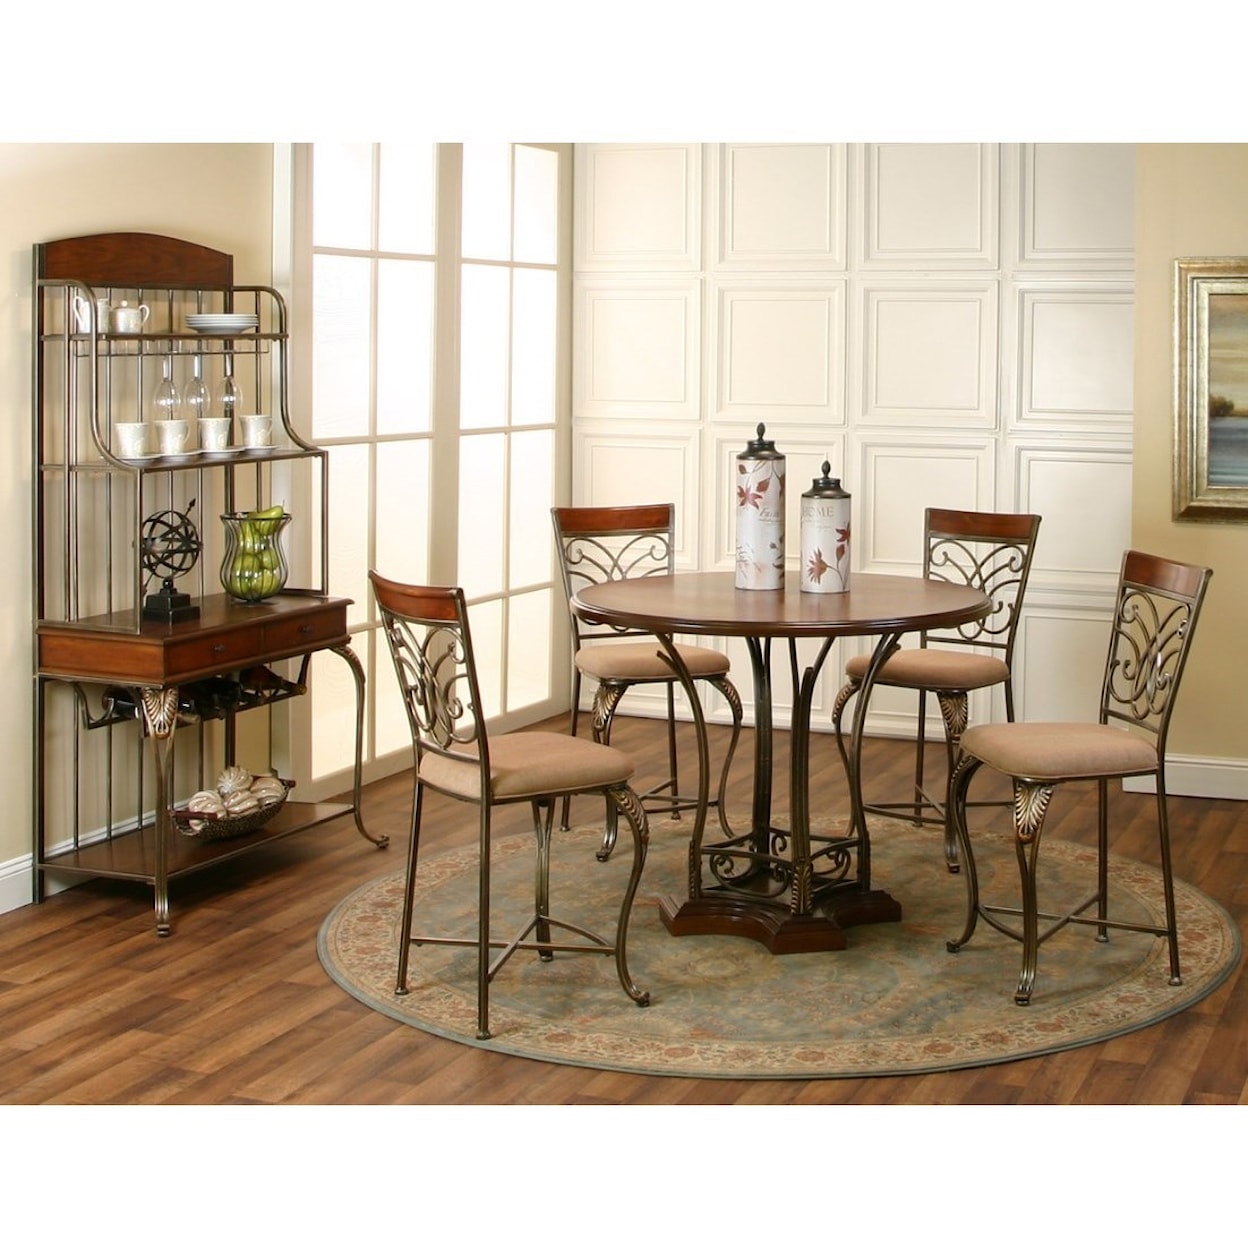 Cramco, Inc Harlow Counter Height Dining Room Group